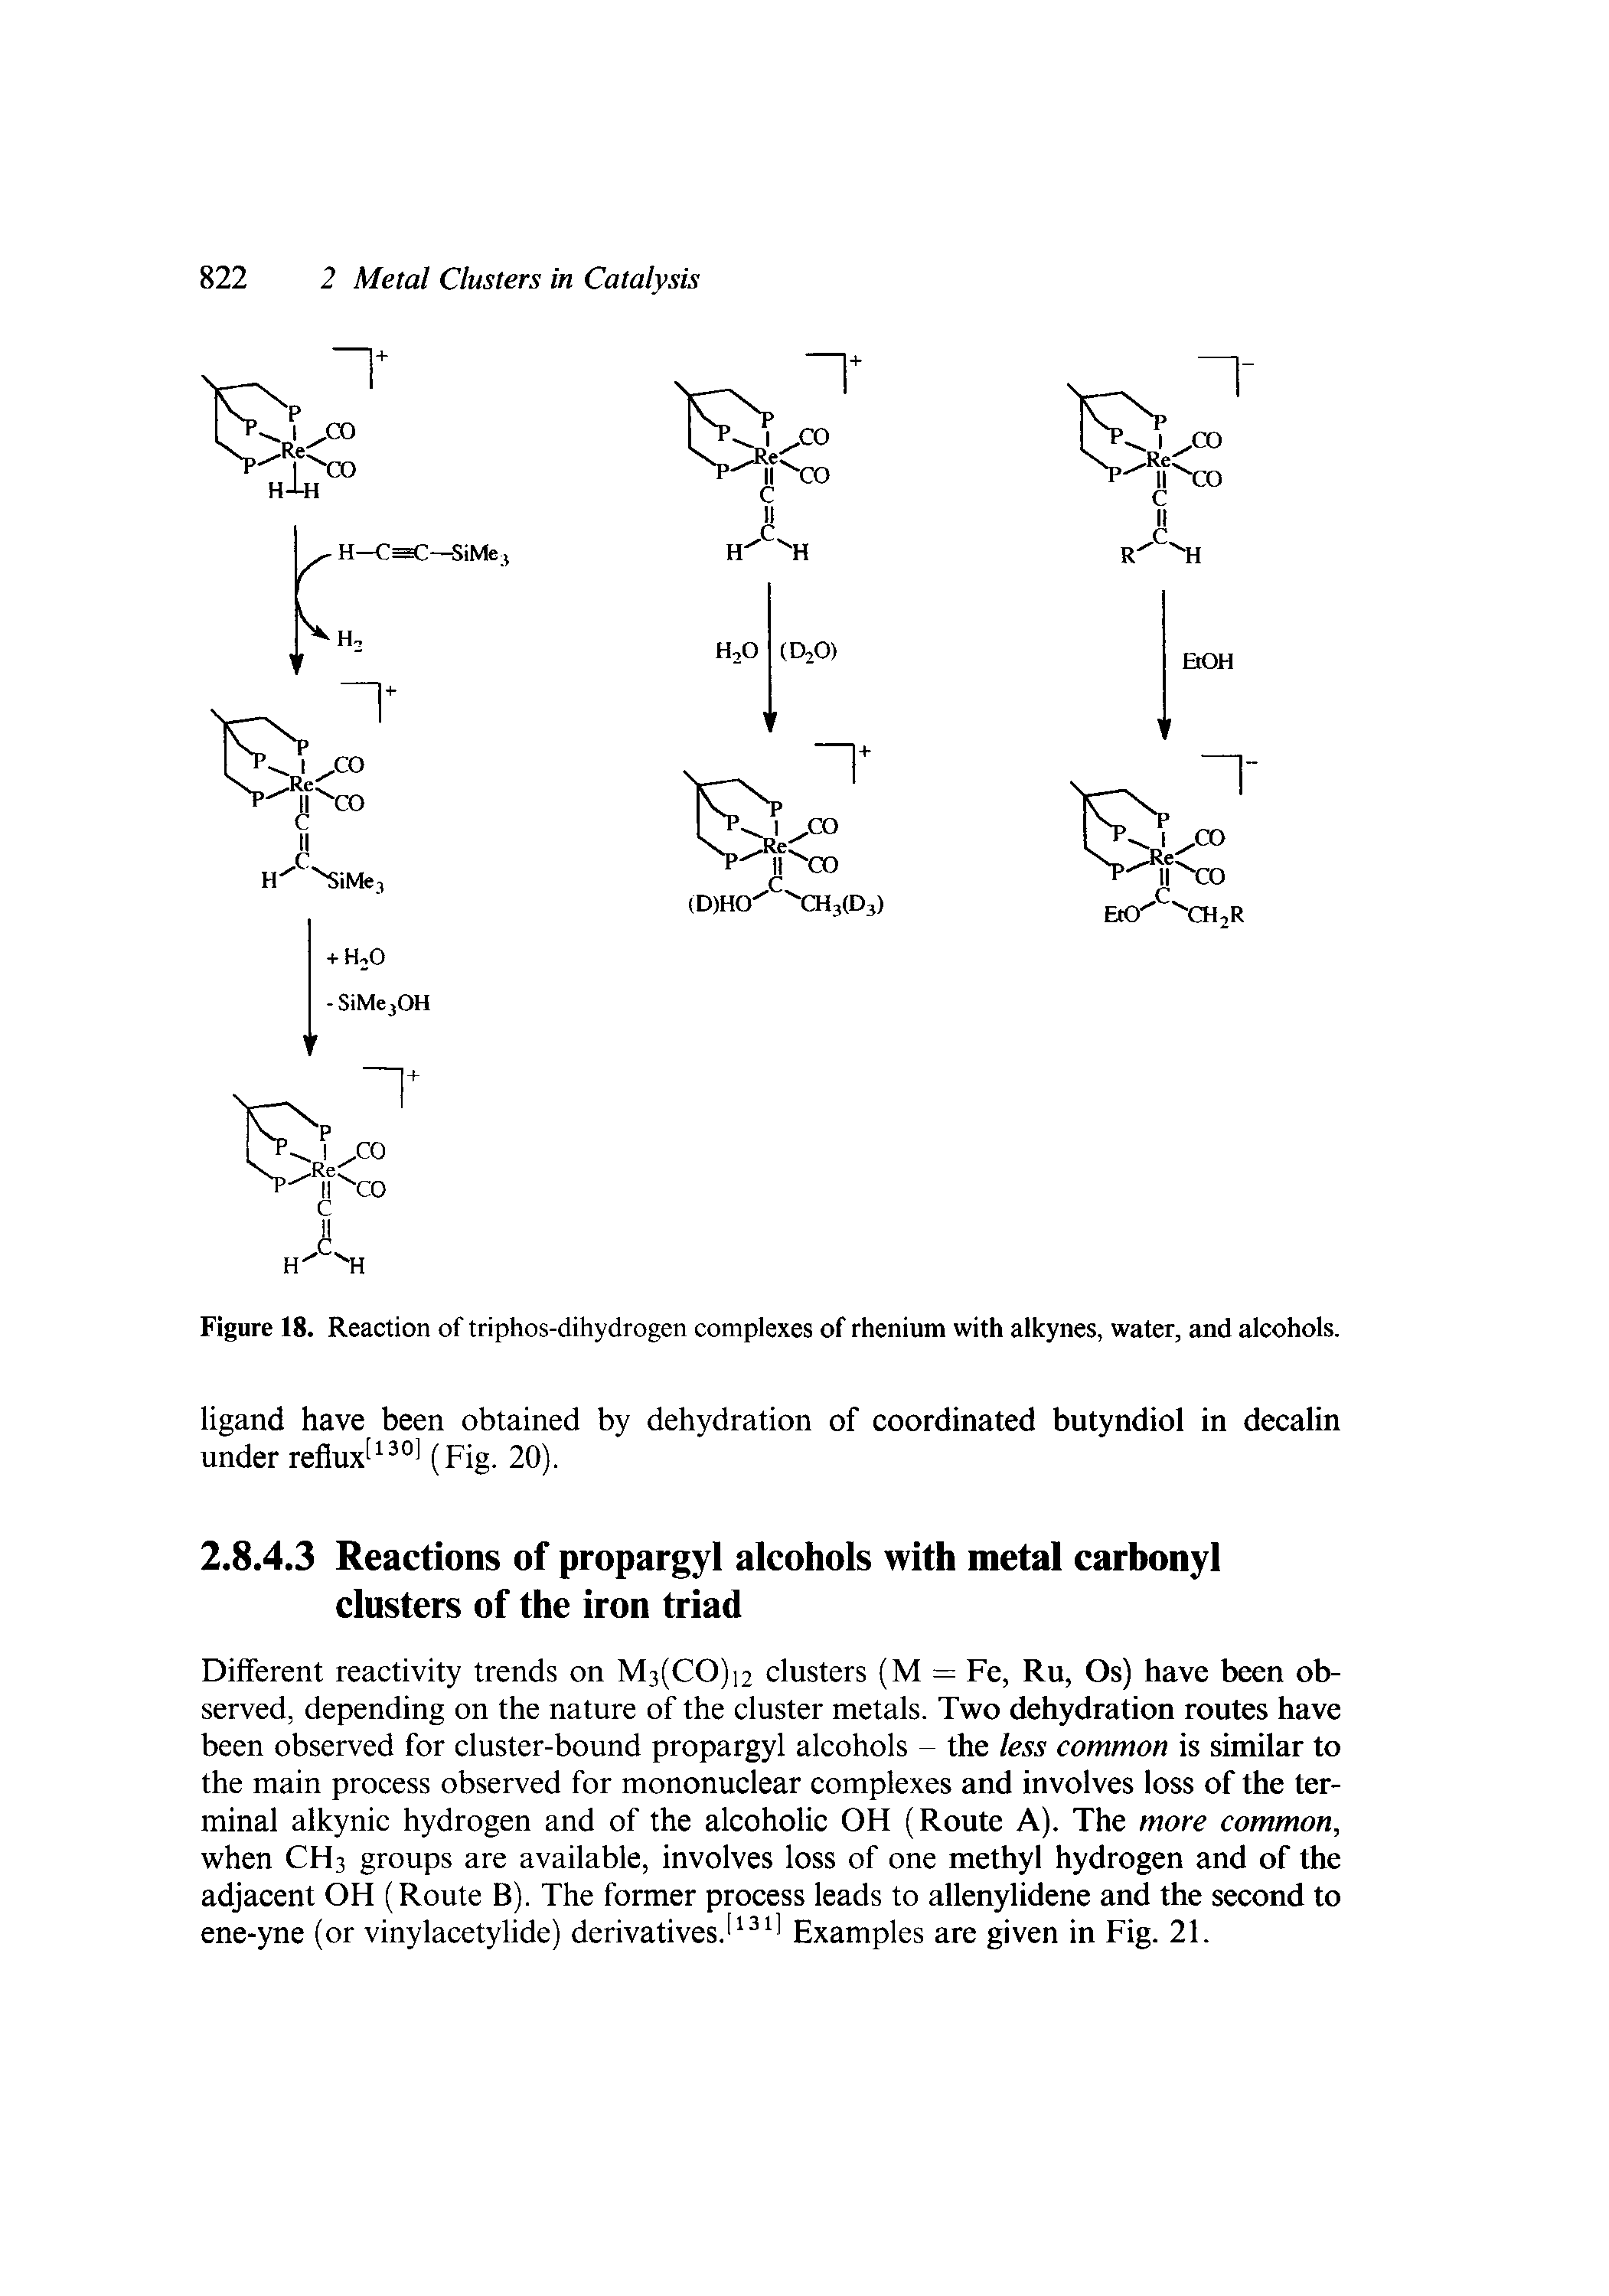 Figure 18. Reaction of triphos-dihydrogen complexes of rhenium with alkynes, water, and alcohols.